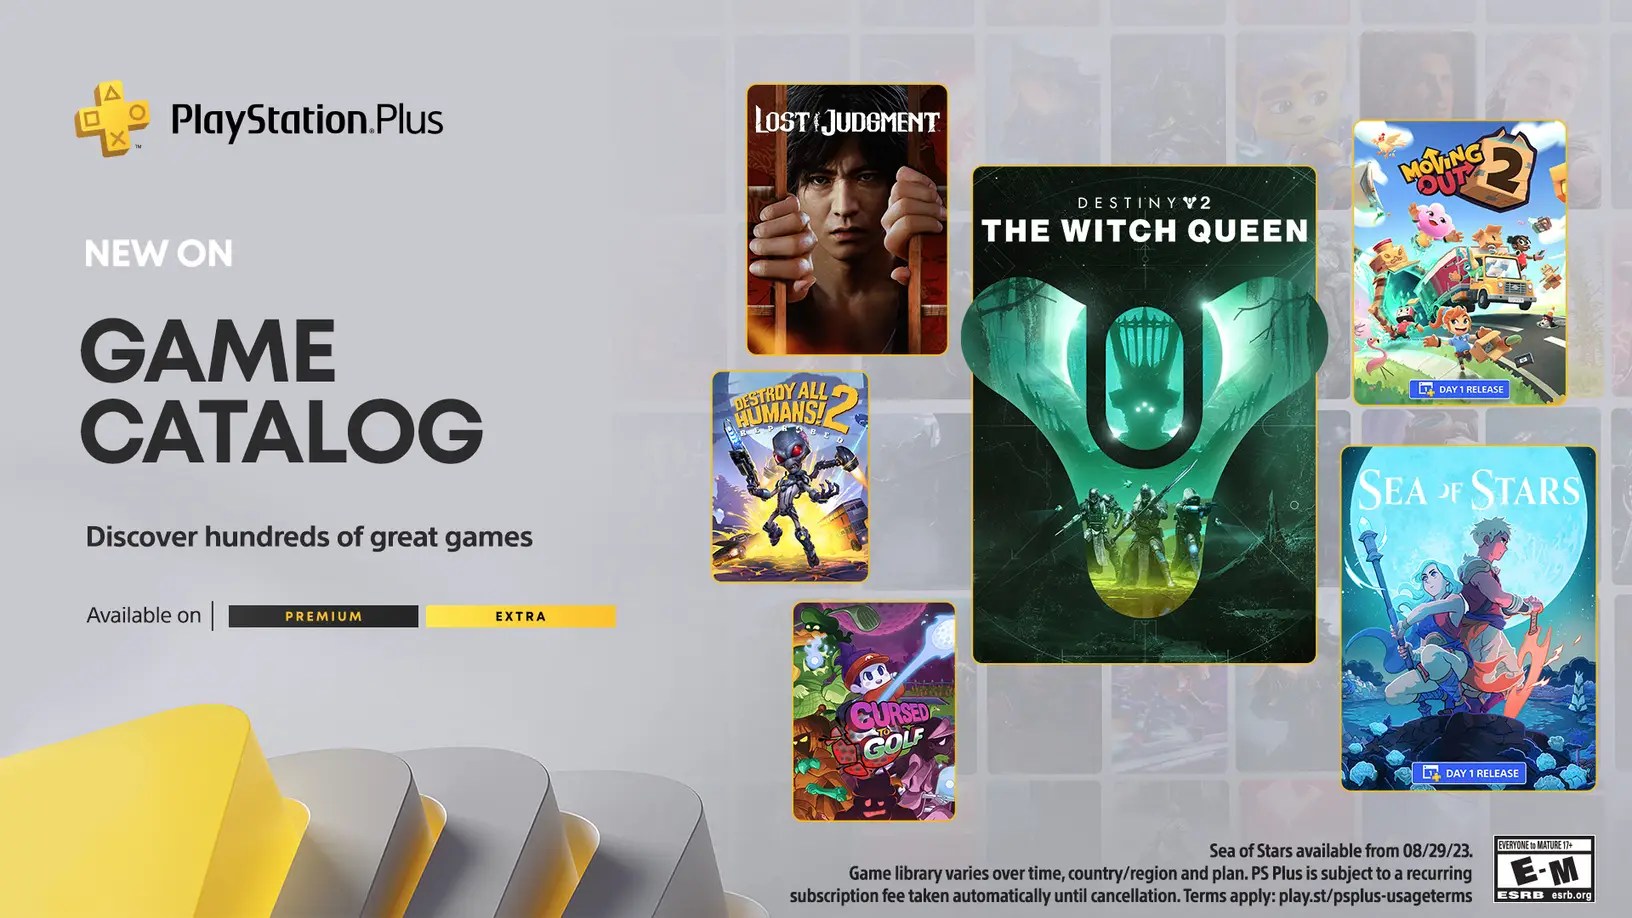 July's PlayStation Plus Extra and Premium games have been announced